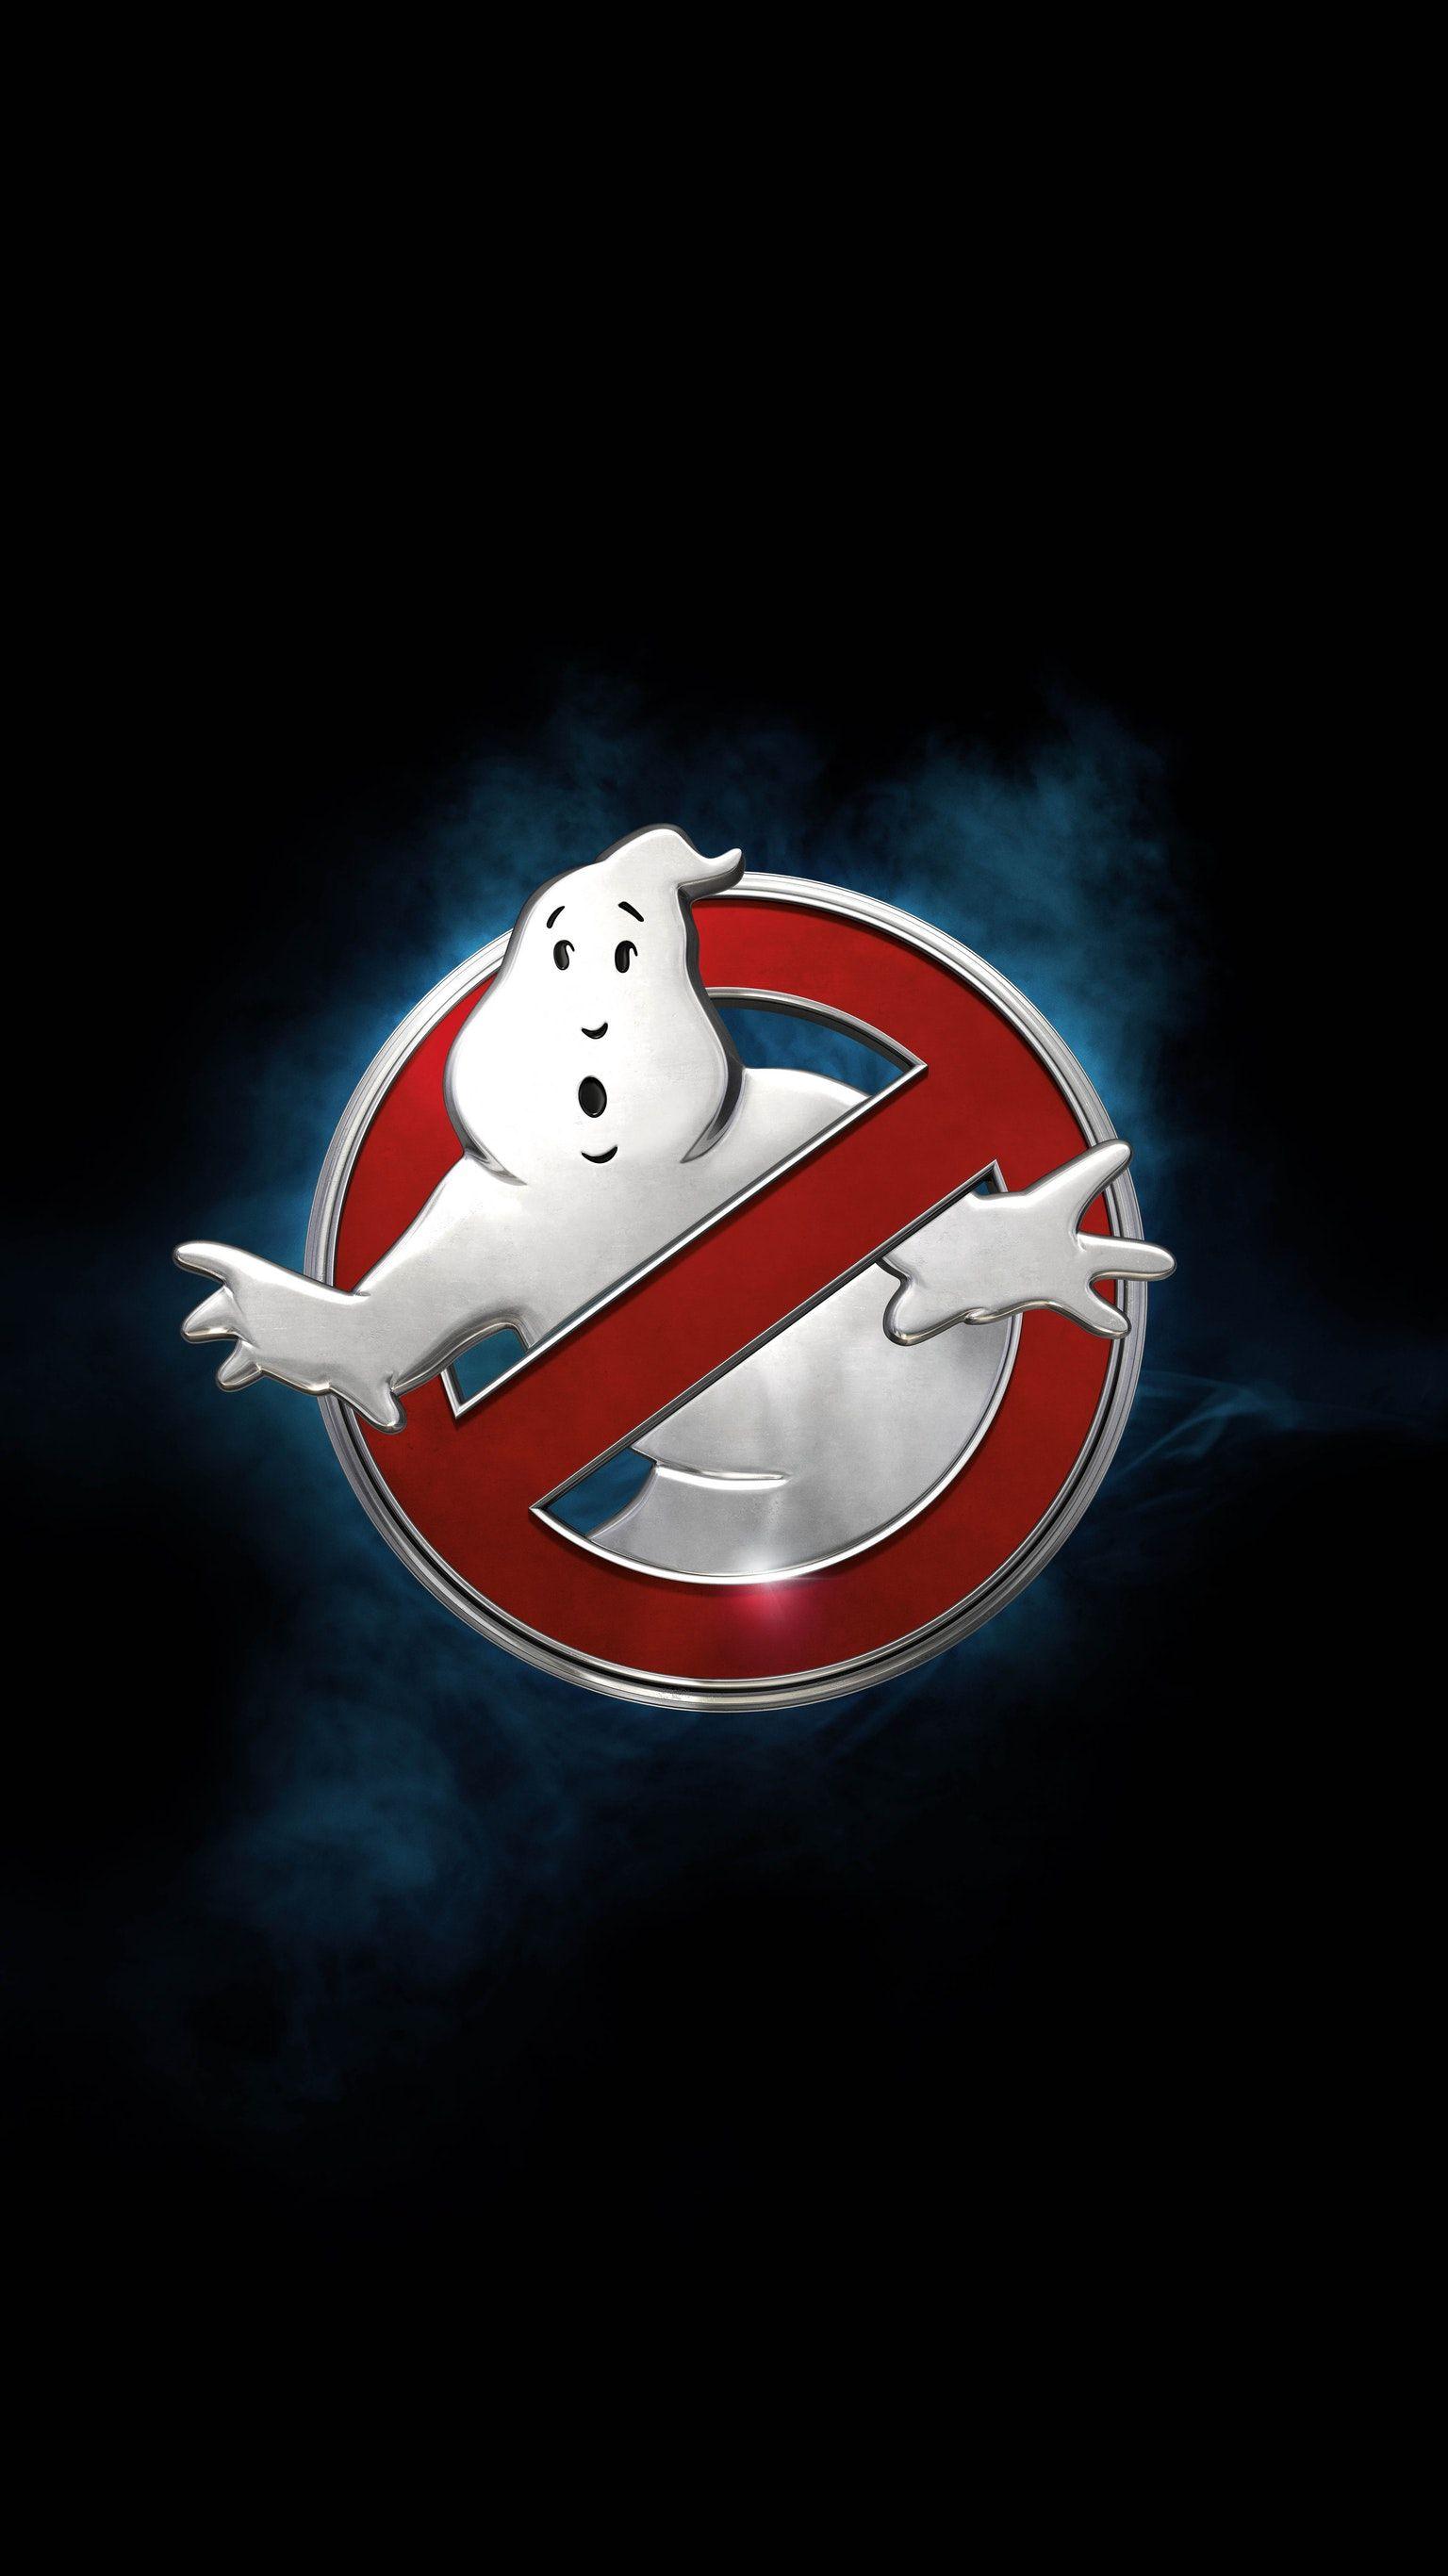 Ghostbusters Iphone Wallpapers Top Free Ghostbusters Iphone Backgrounds Wallpaperaccess